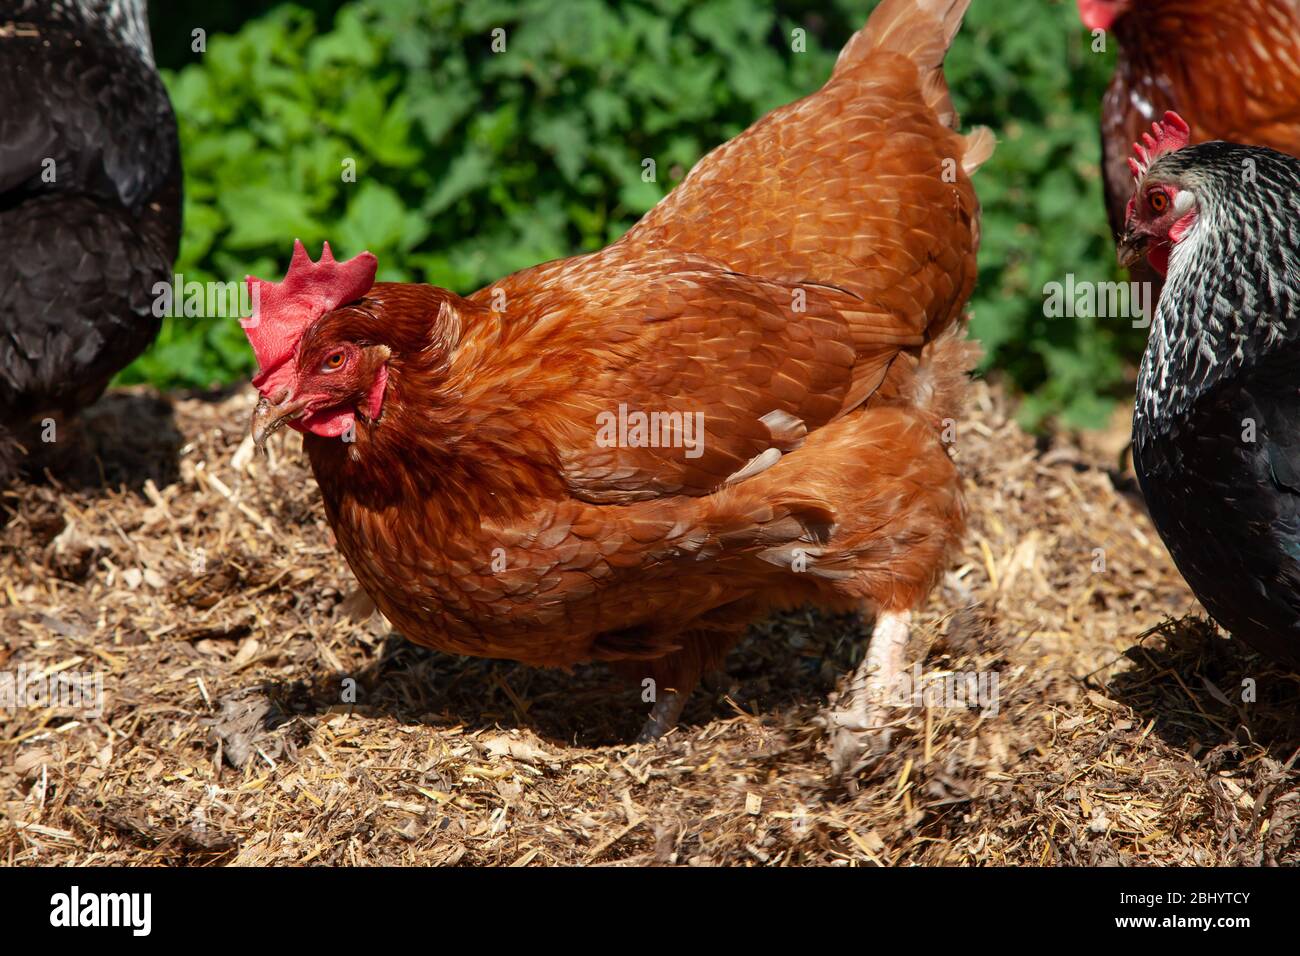 Free Range hens searching for food in back garden. British Isles. Stock Photo